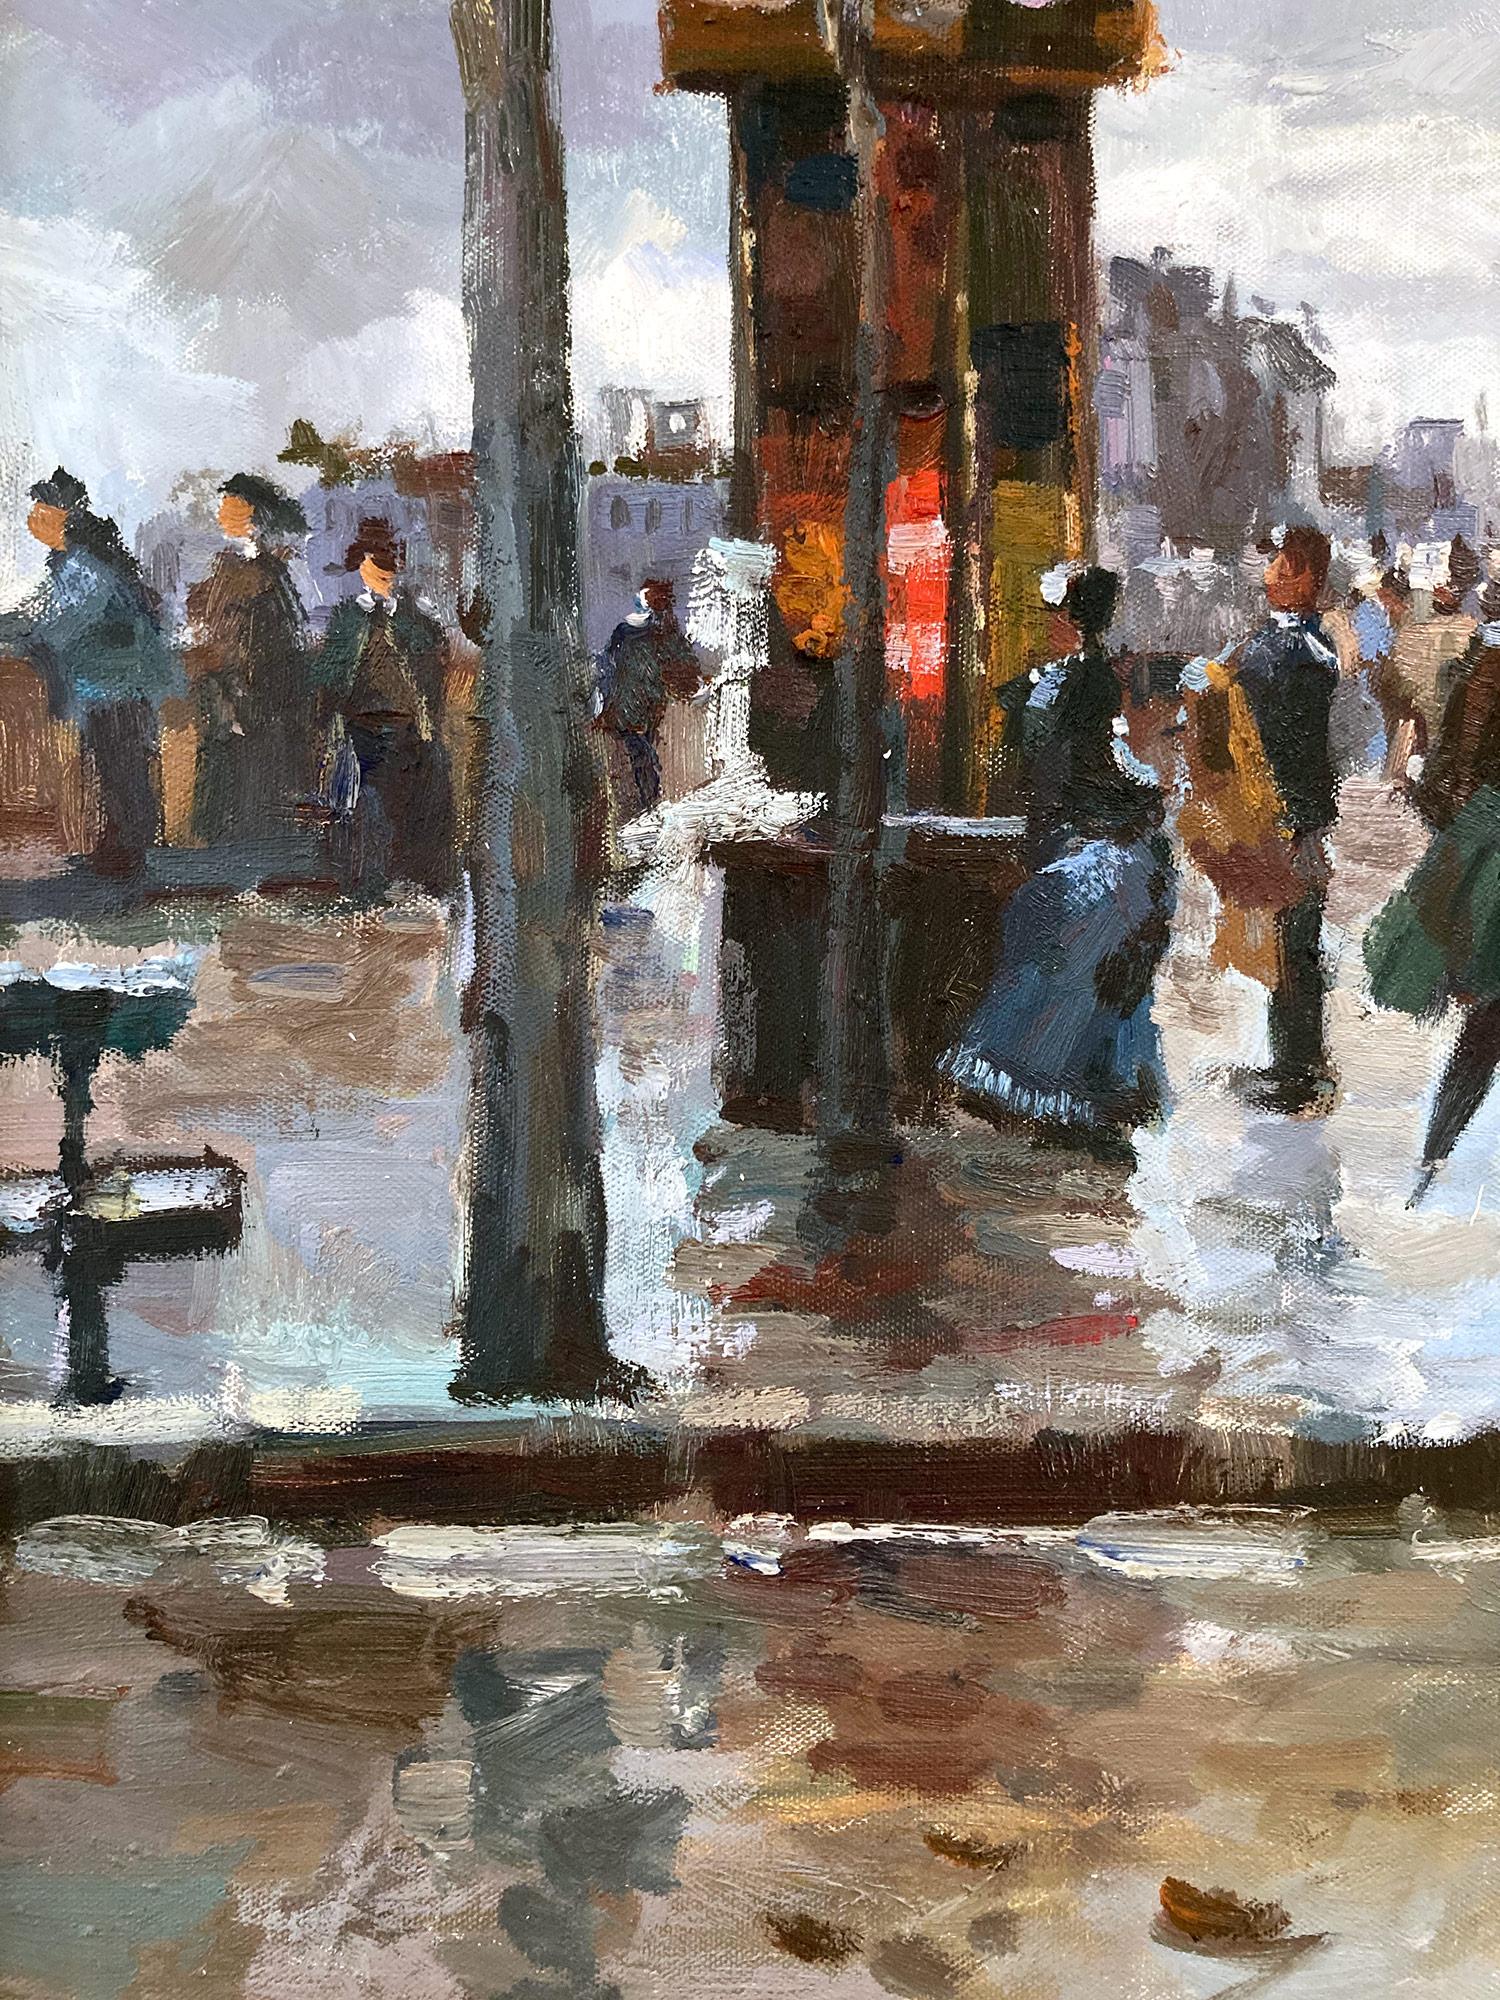 An impressionist oil painting depicting a French street scene by the Esplanade des Quinconces
in France. There are horse and buggy along the street with bustling of people walking about their day. A vivid and impressive work with wonderful